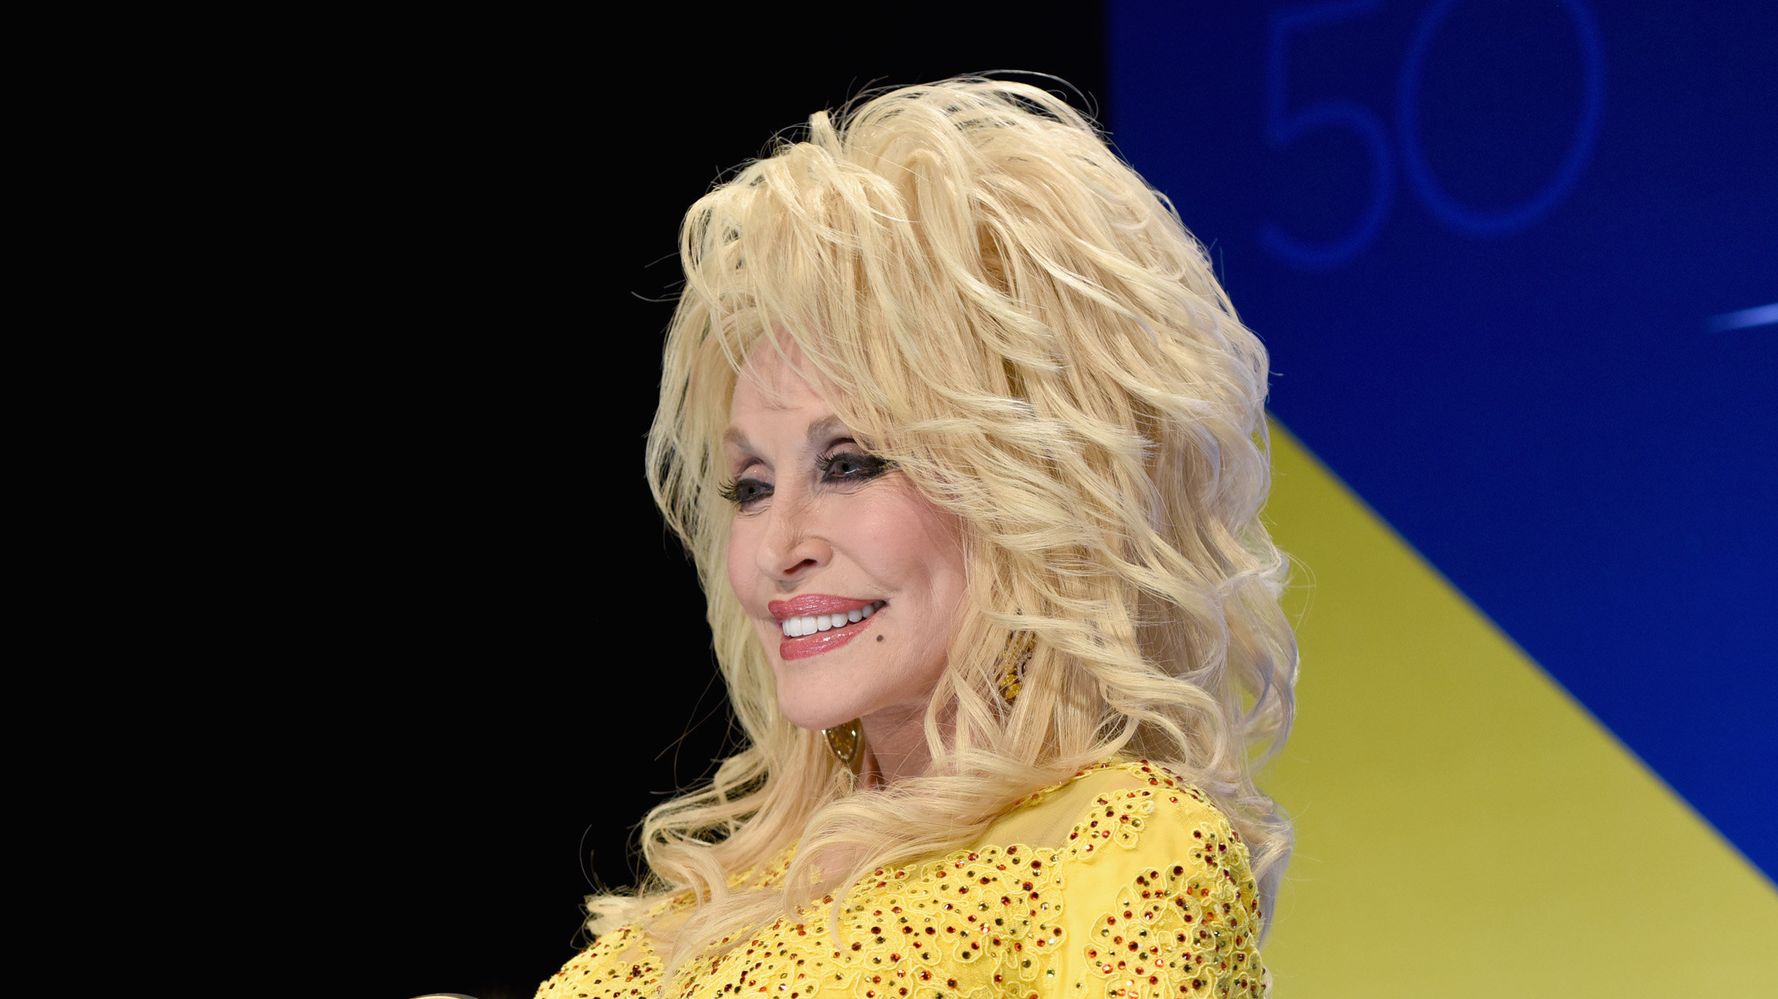 Dolly Parton Shines Like A Thousand Suns In This Yellow Gown.